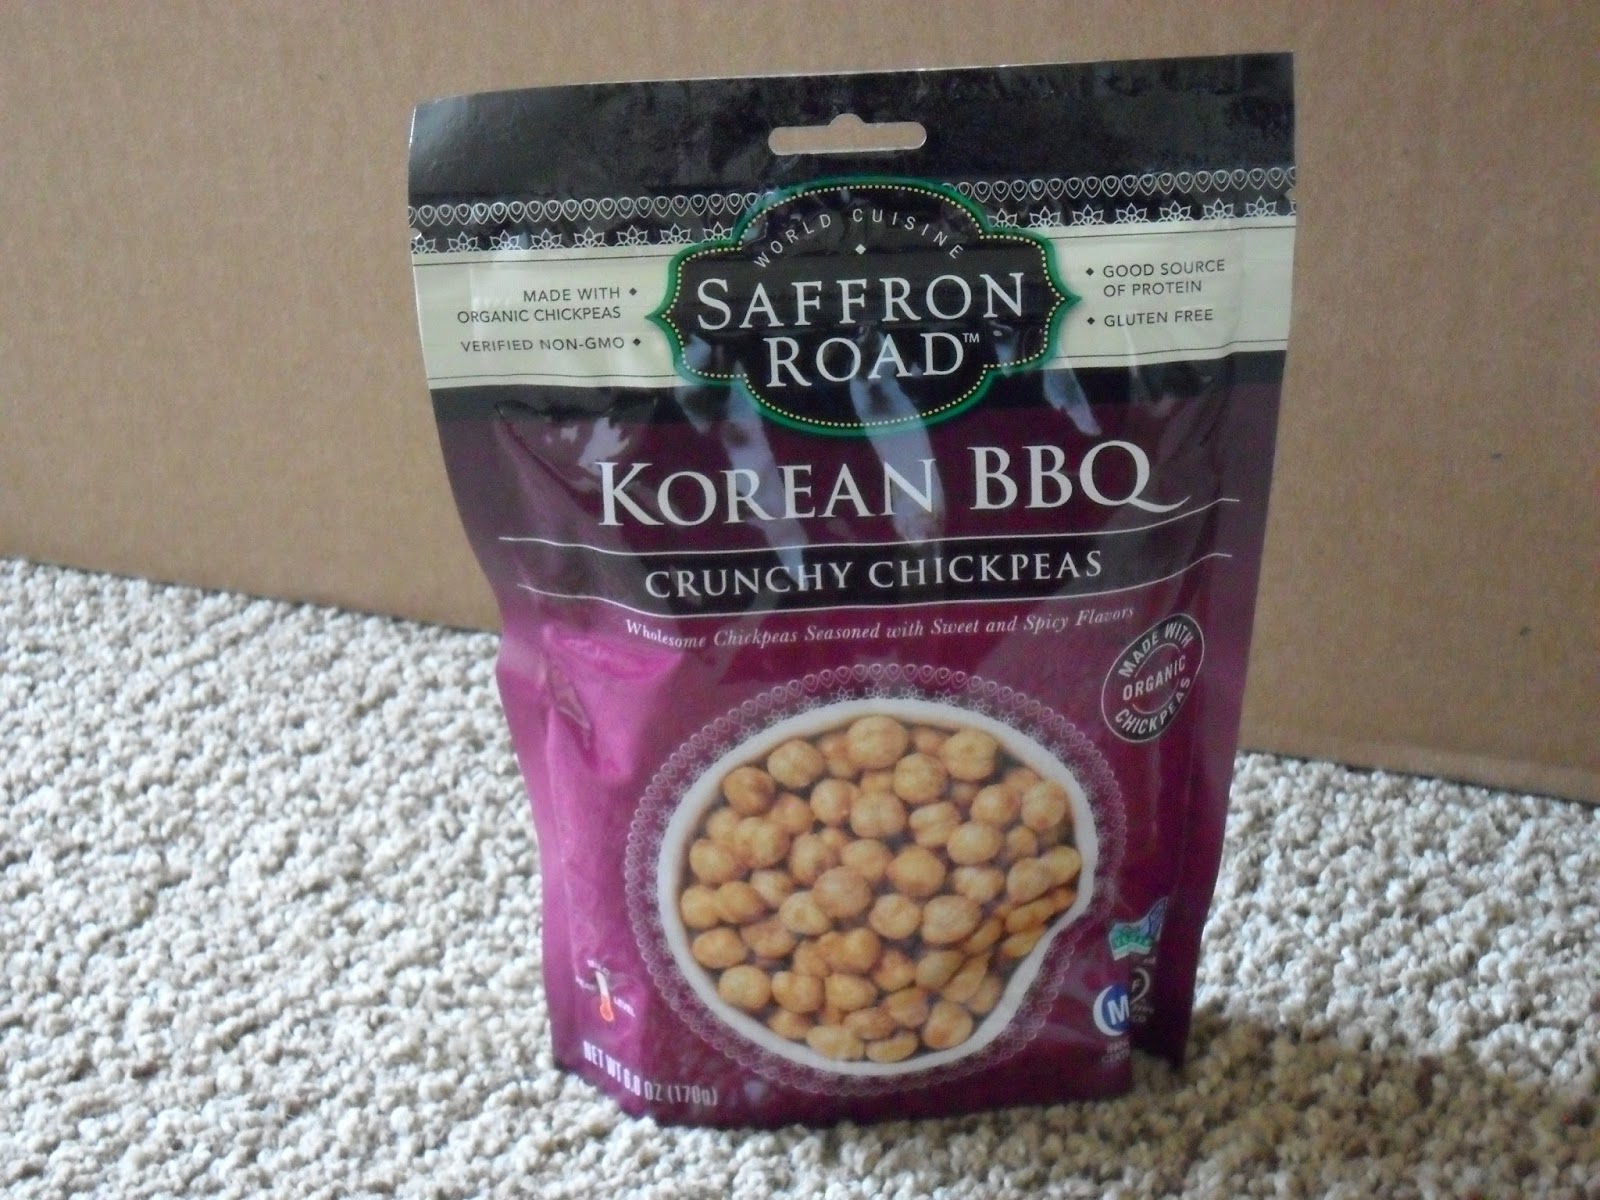 Trendy and tasty crunchy chickpeas from Saffron Road. Review